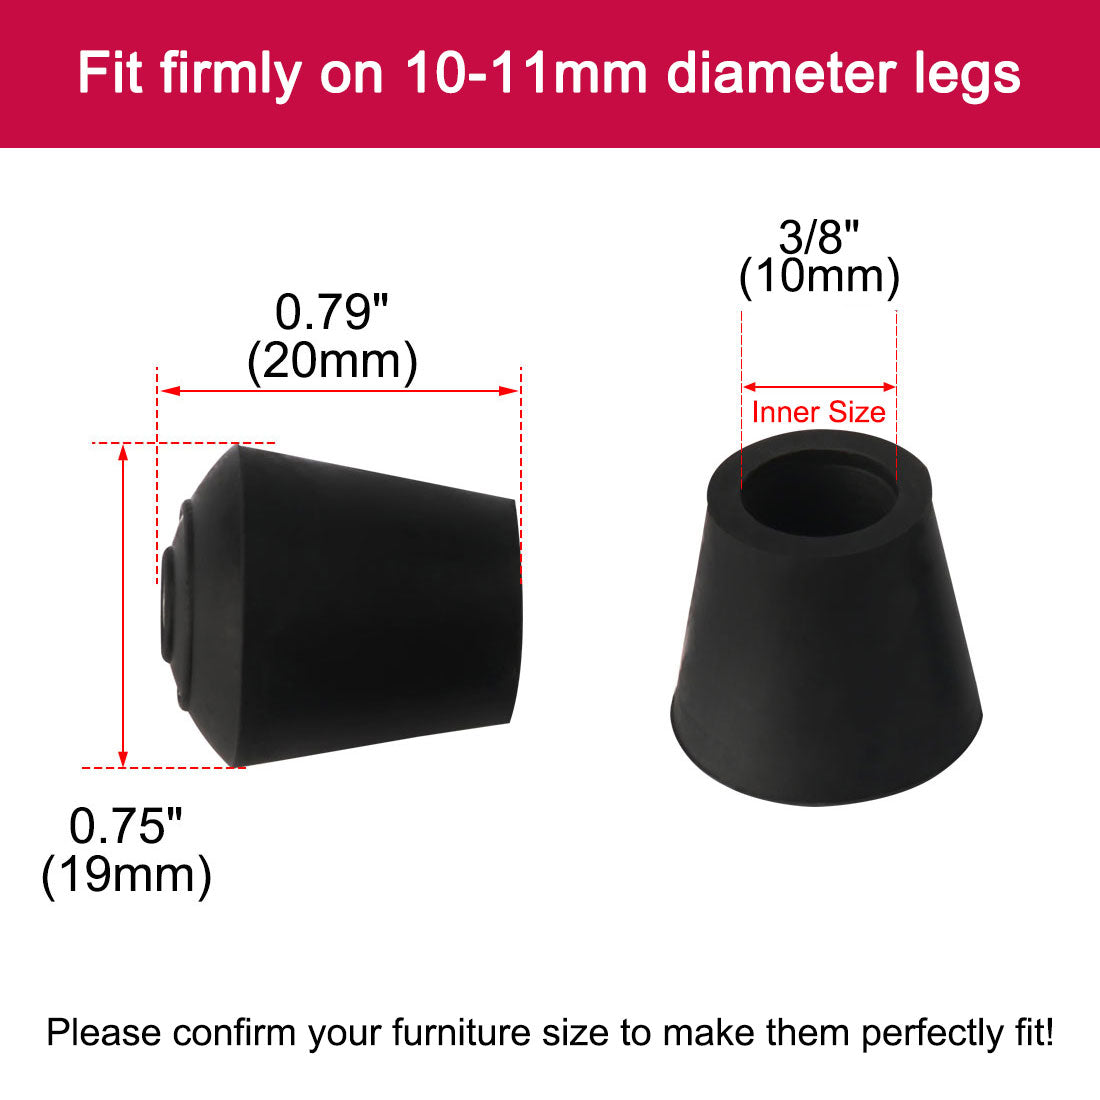 uxcell Uxcell Rubber Leg Cap Tip Cup Feet Cover 10mm 3/8" Inner Dia 8pcs for Furniture Chair